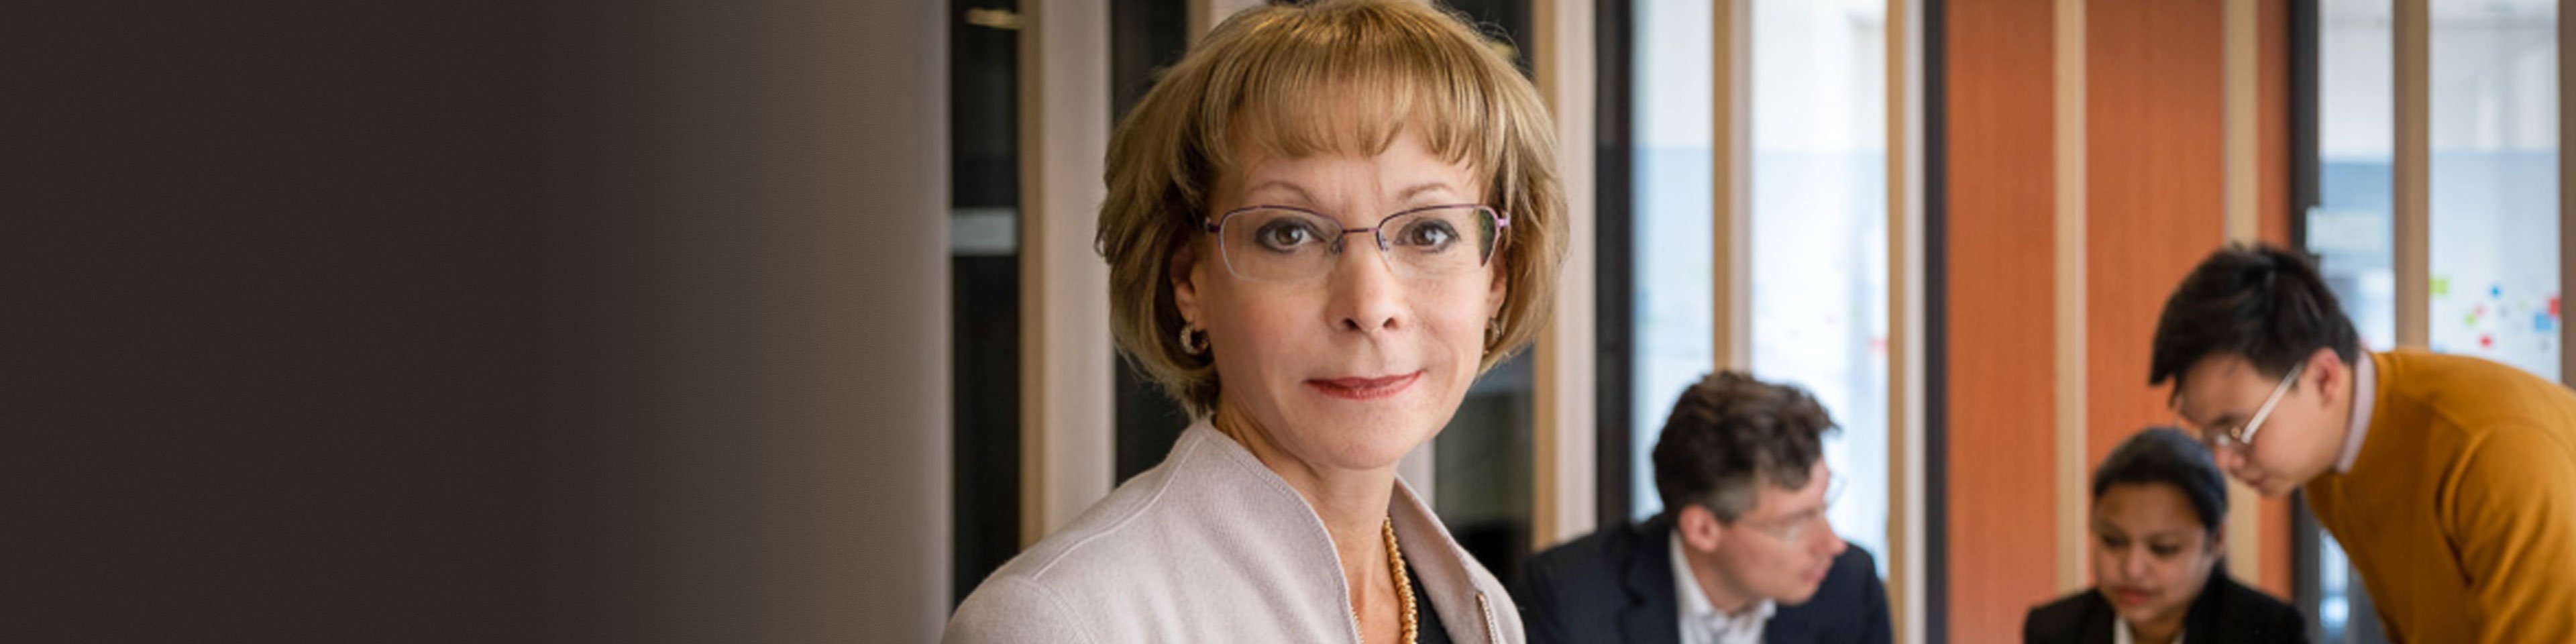 Nancy McKinstry featured on leadership podcast